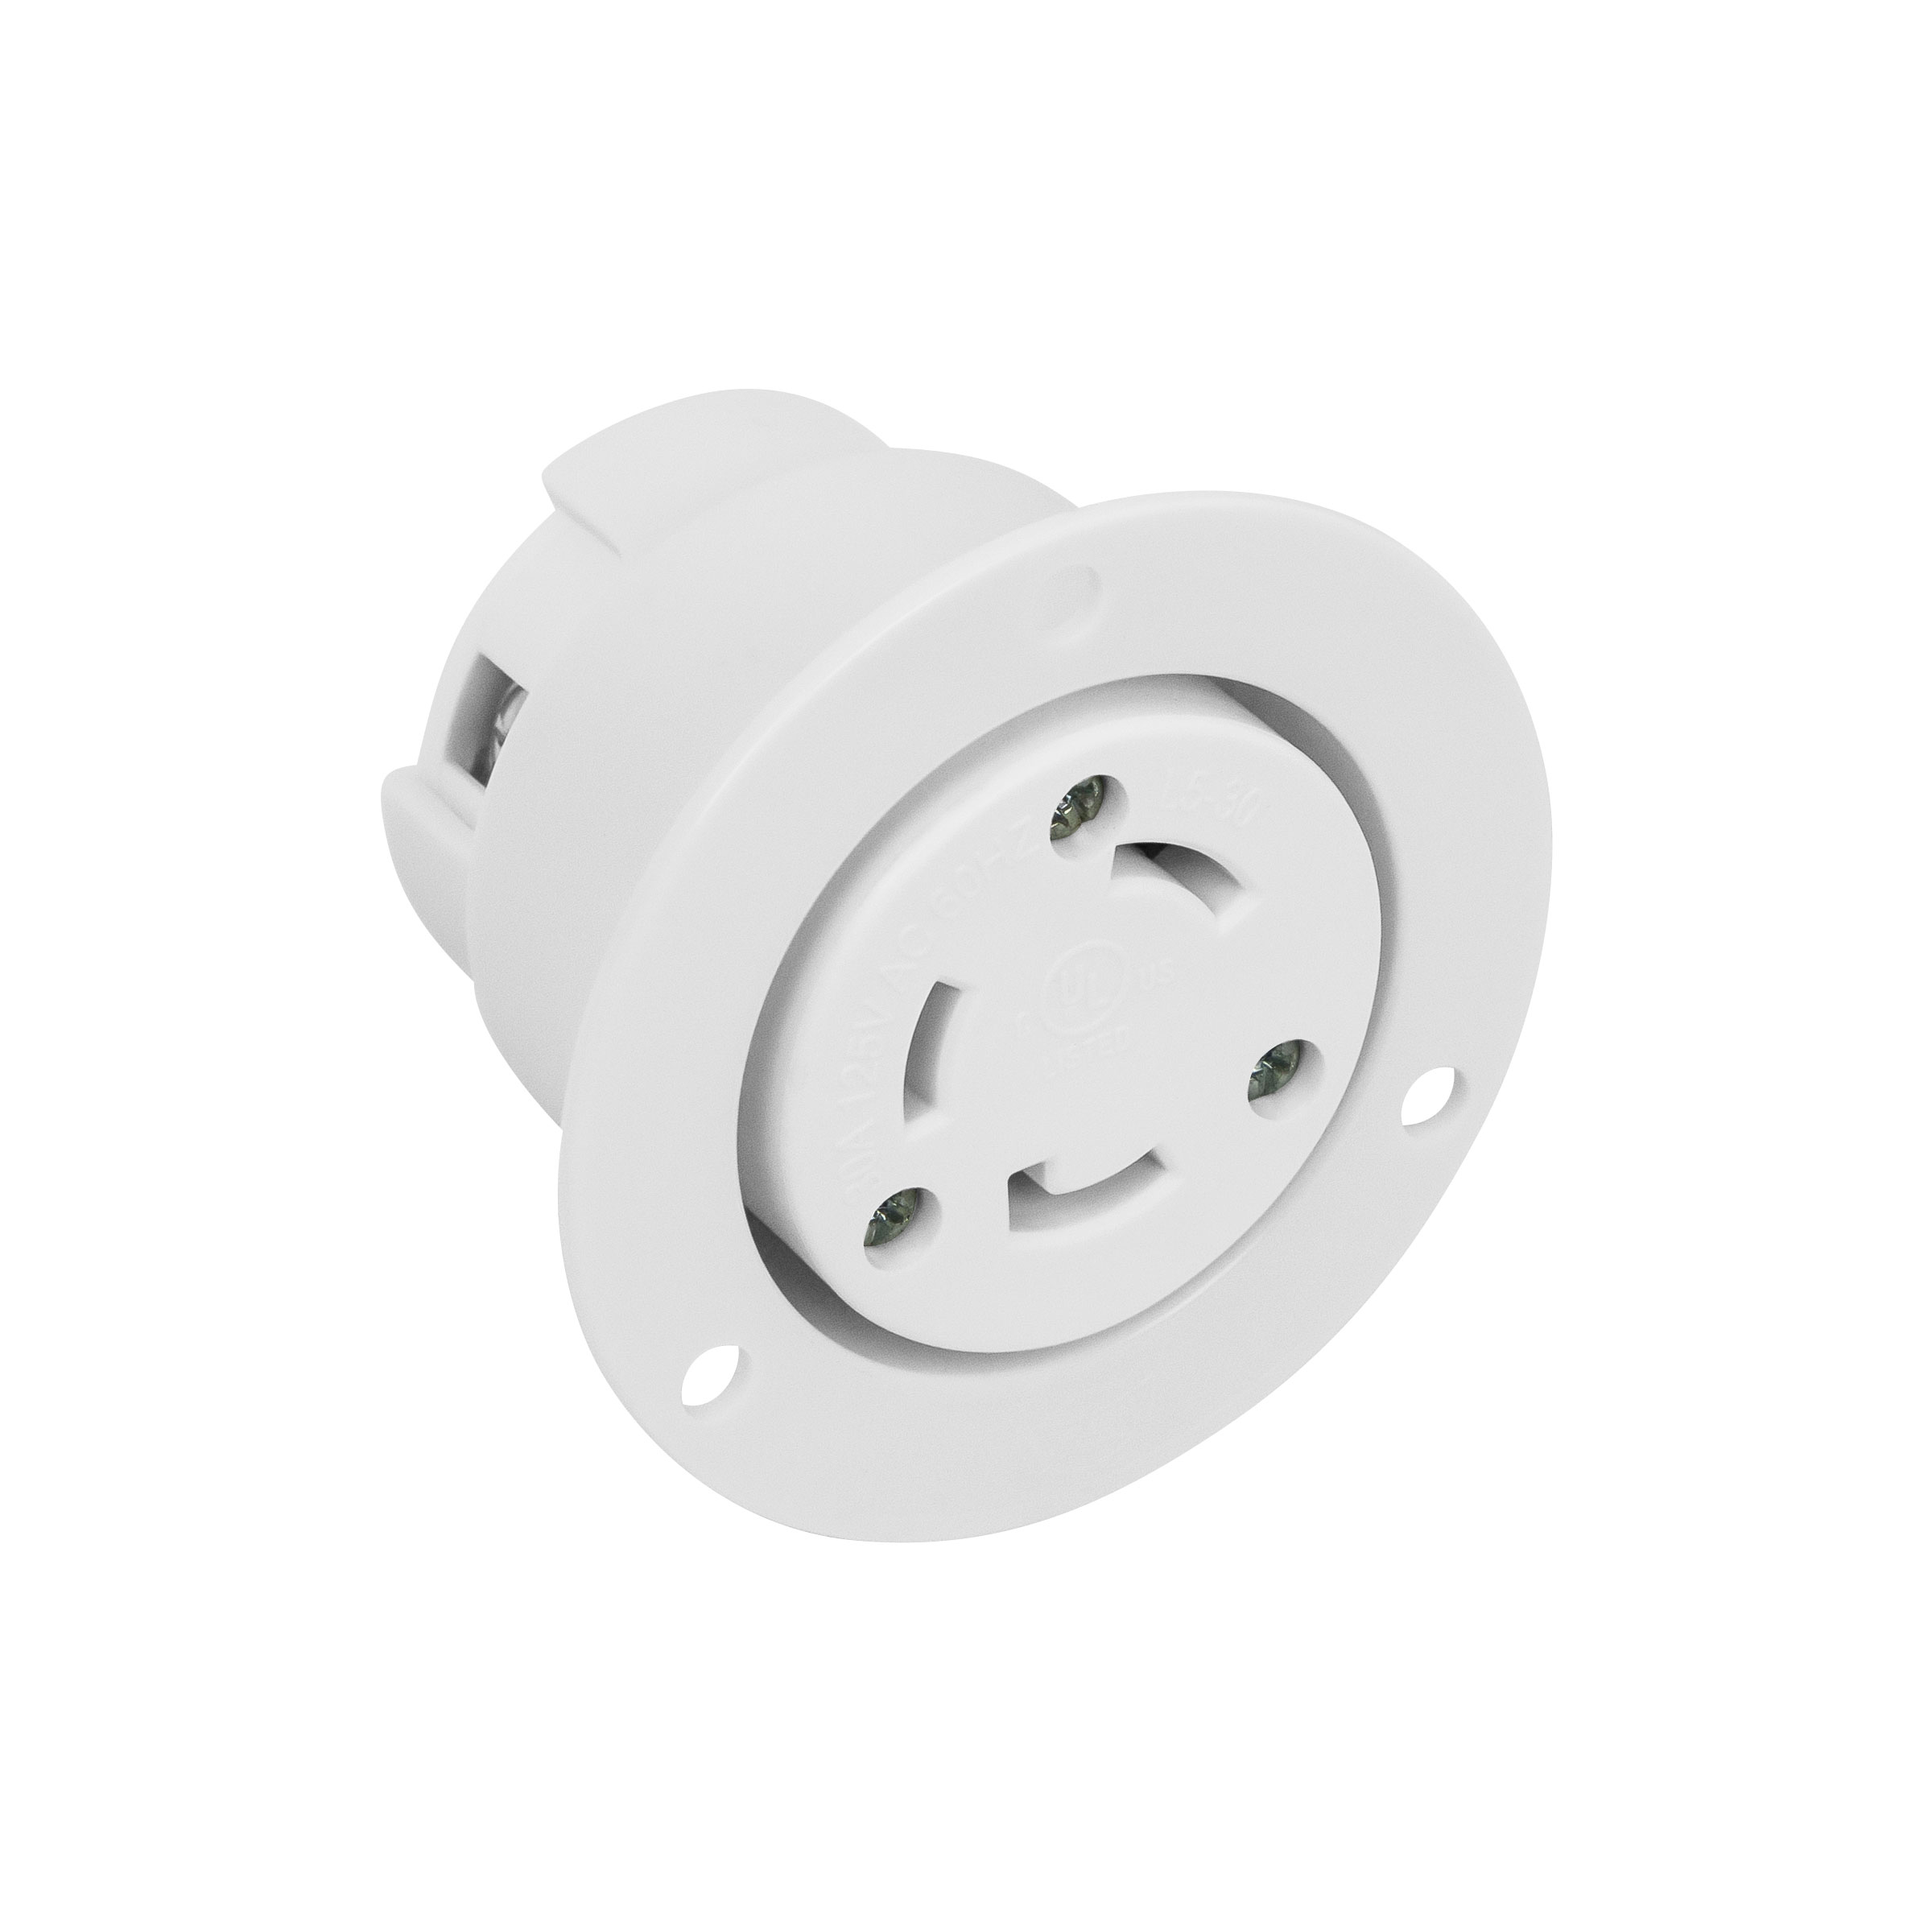 NEMA L5-30 Flanged Outlet Locking Plug Charger Receptacle 30 Amp White